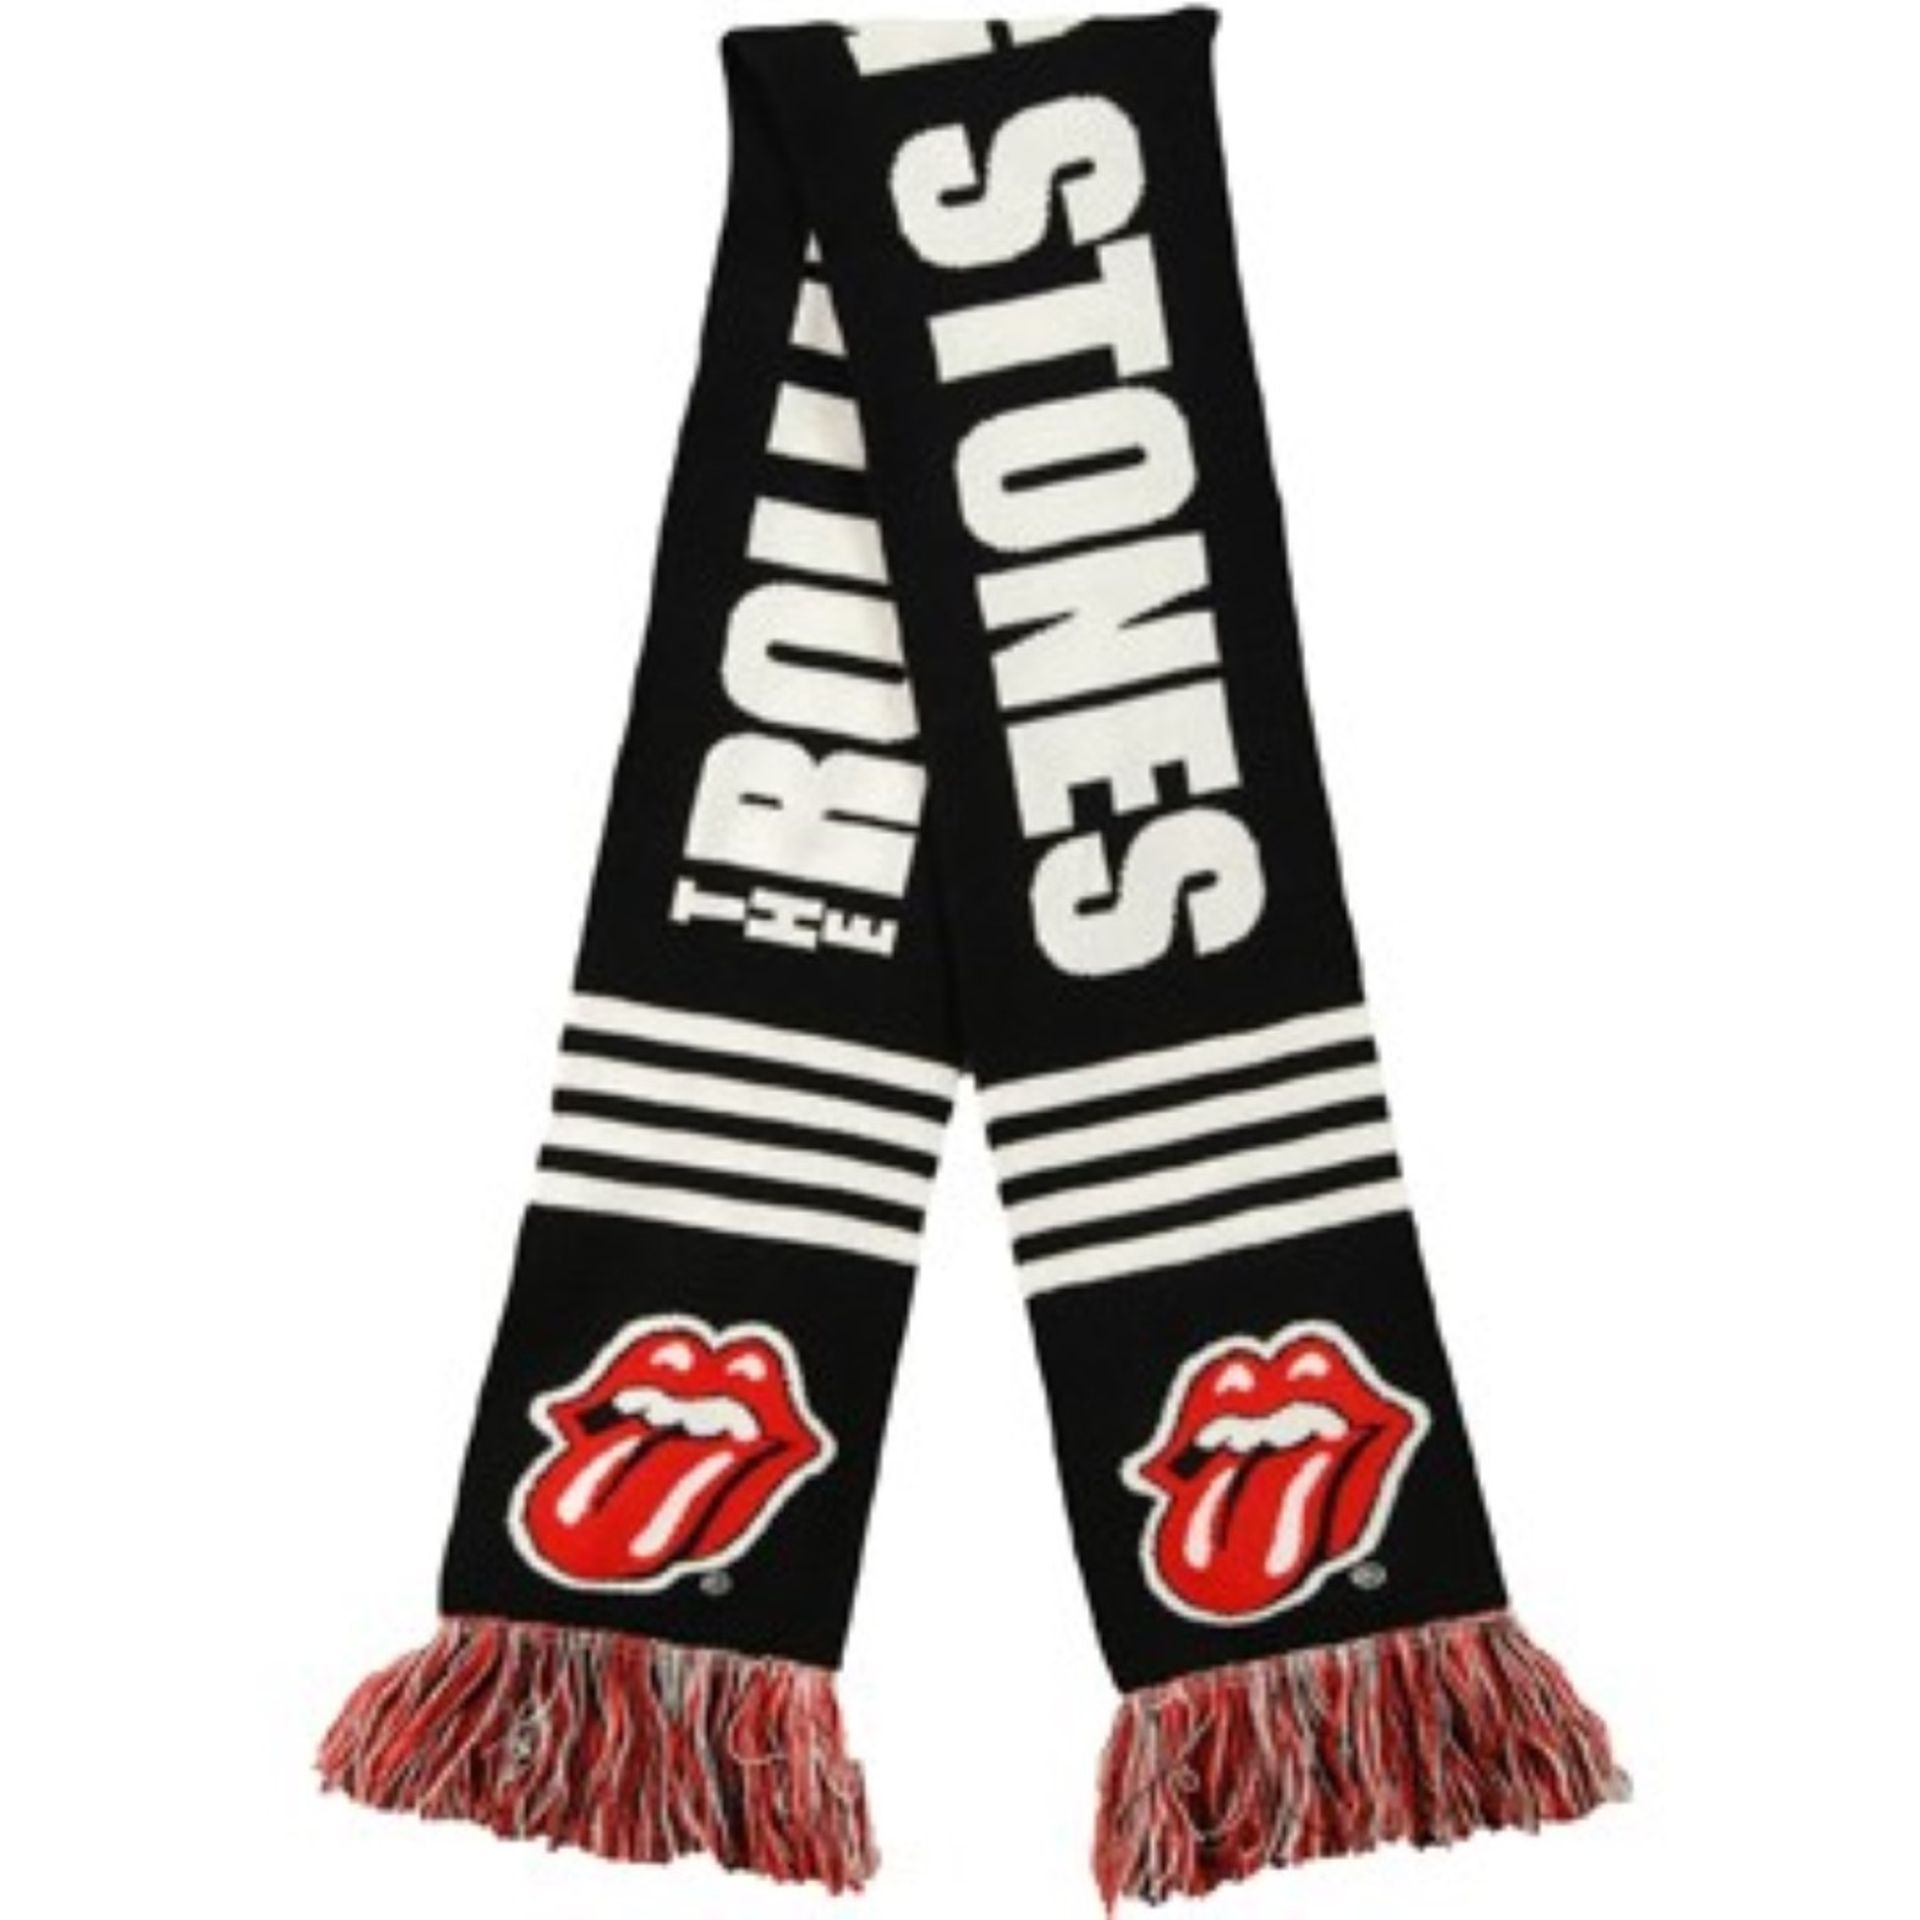 1 x Rolling Stones Scarf - Classic Tongue and Logo Design - Officially Licensed Merchandise - New & - Image 5 of 6